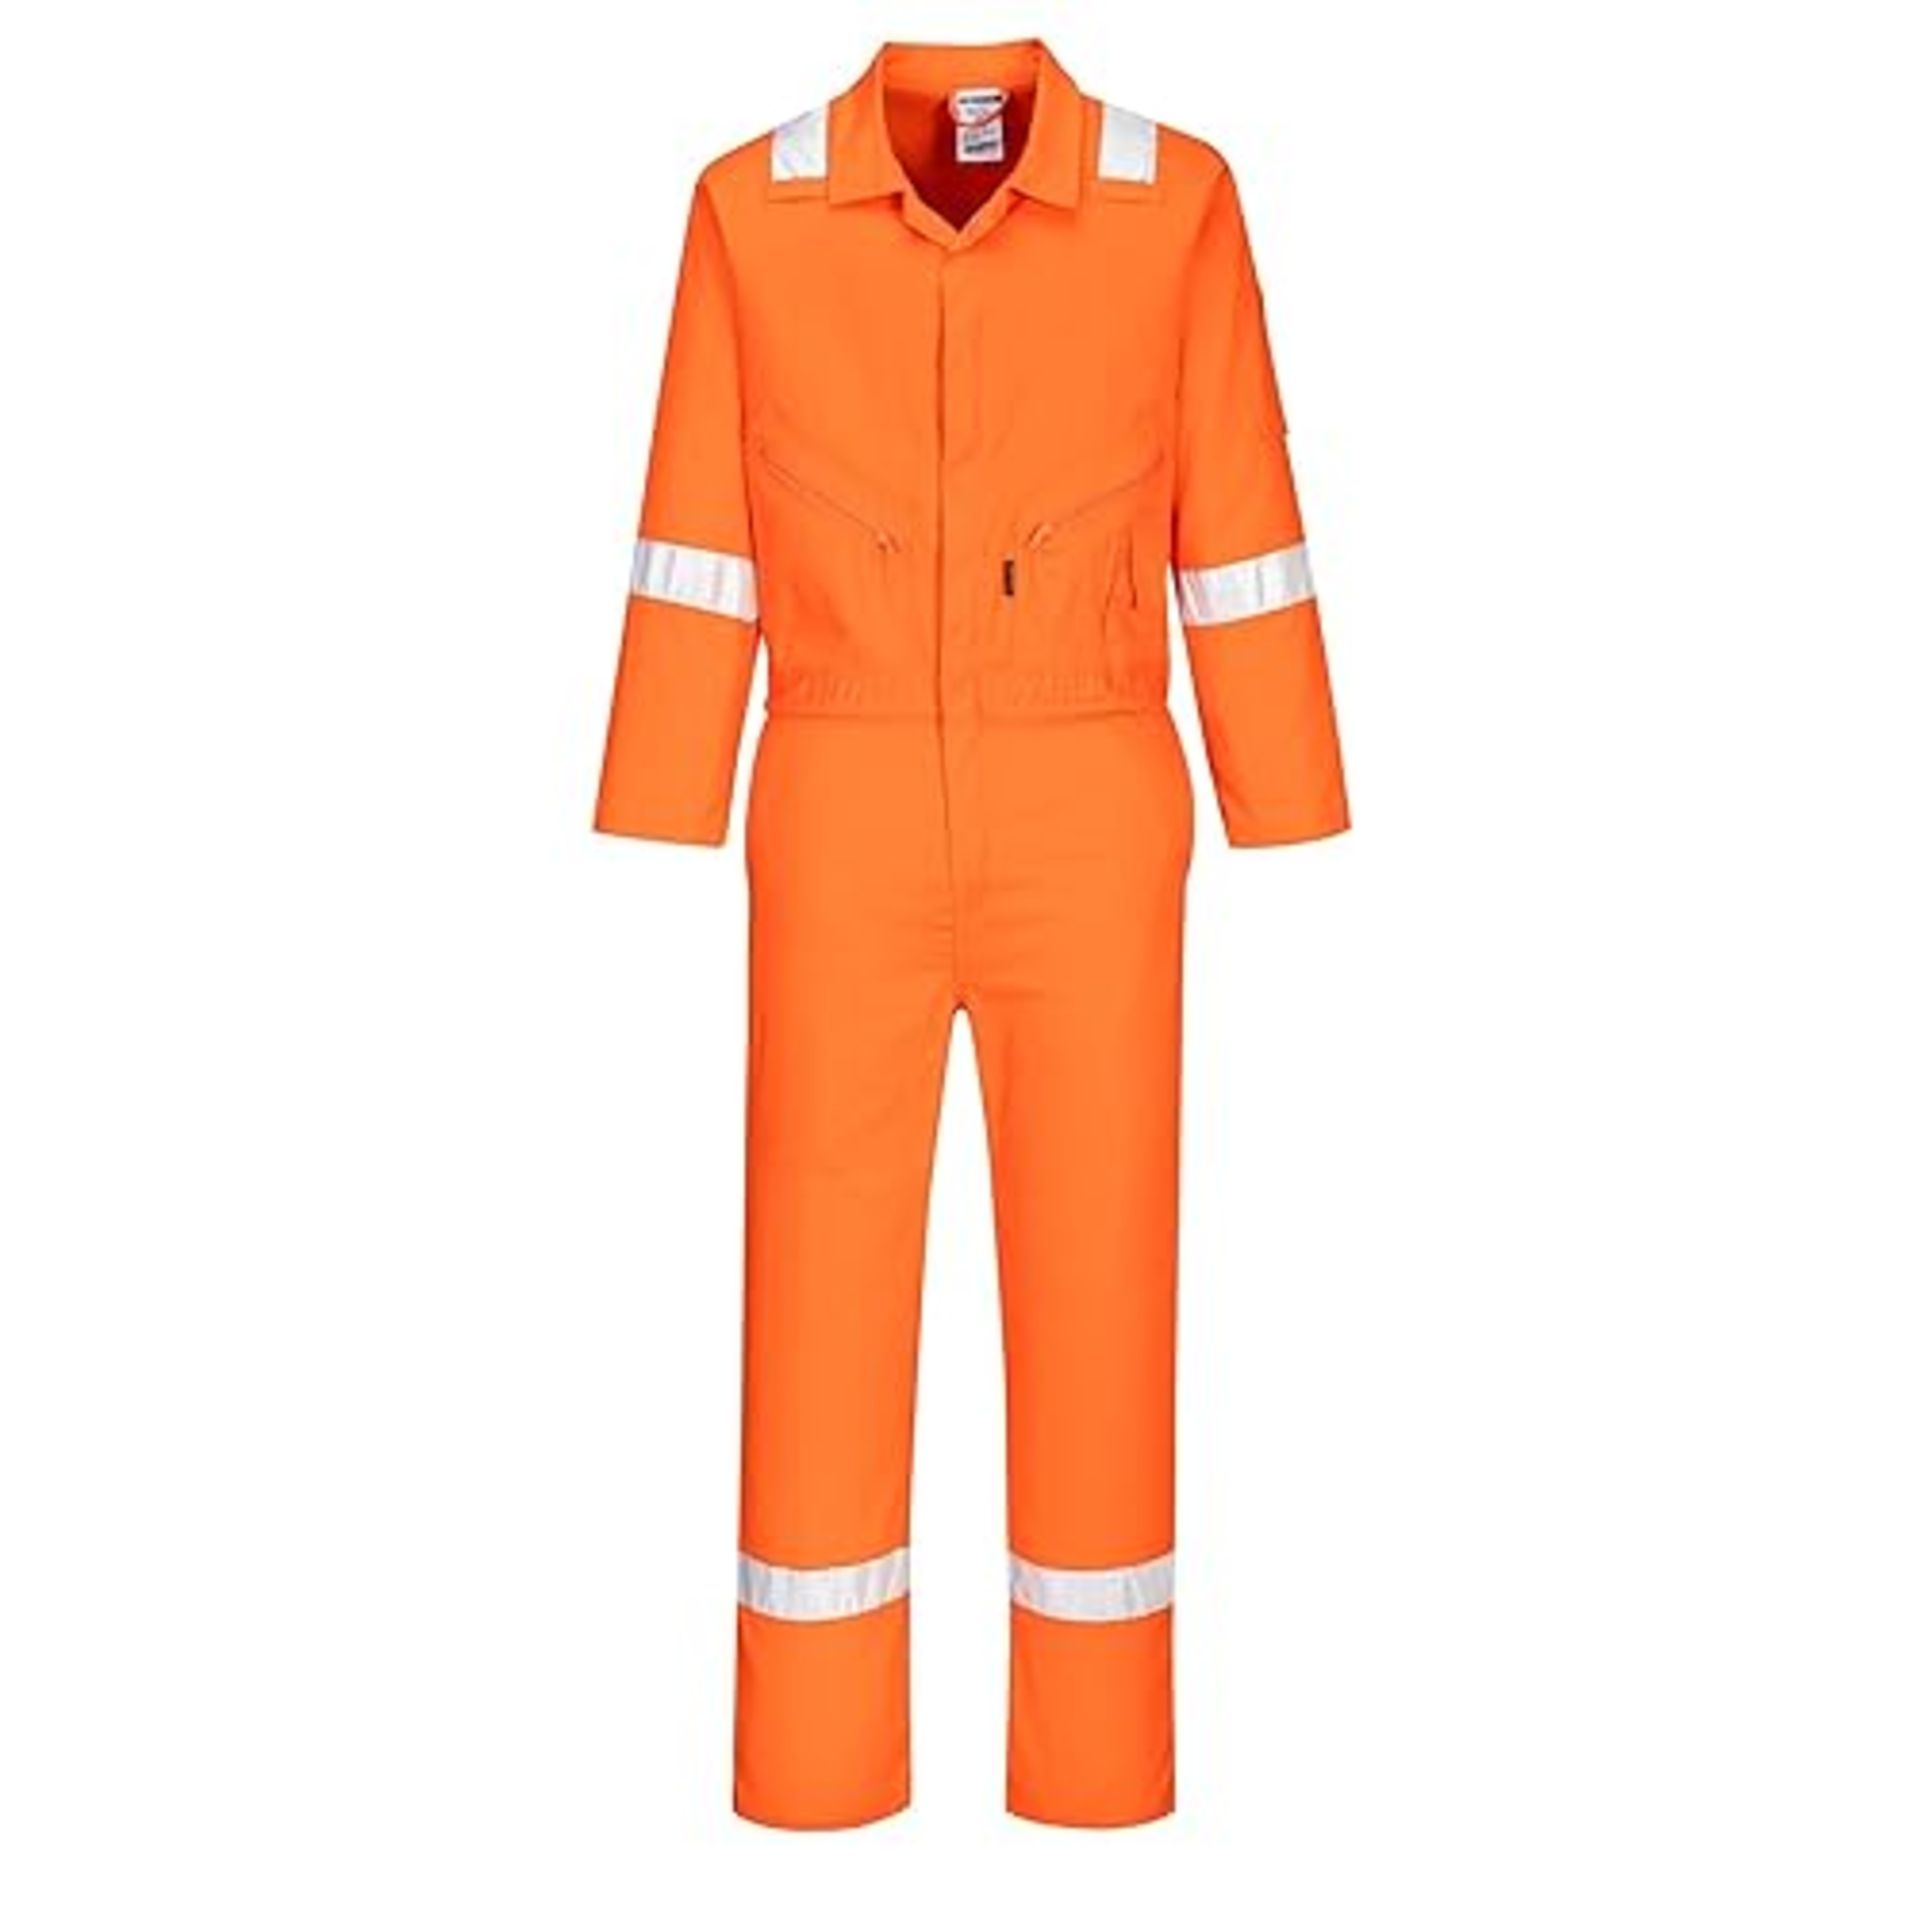 Portwest C814 Iona Lightweight Reflective Cotton Coverall Orange, 3X-Large